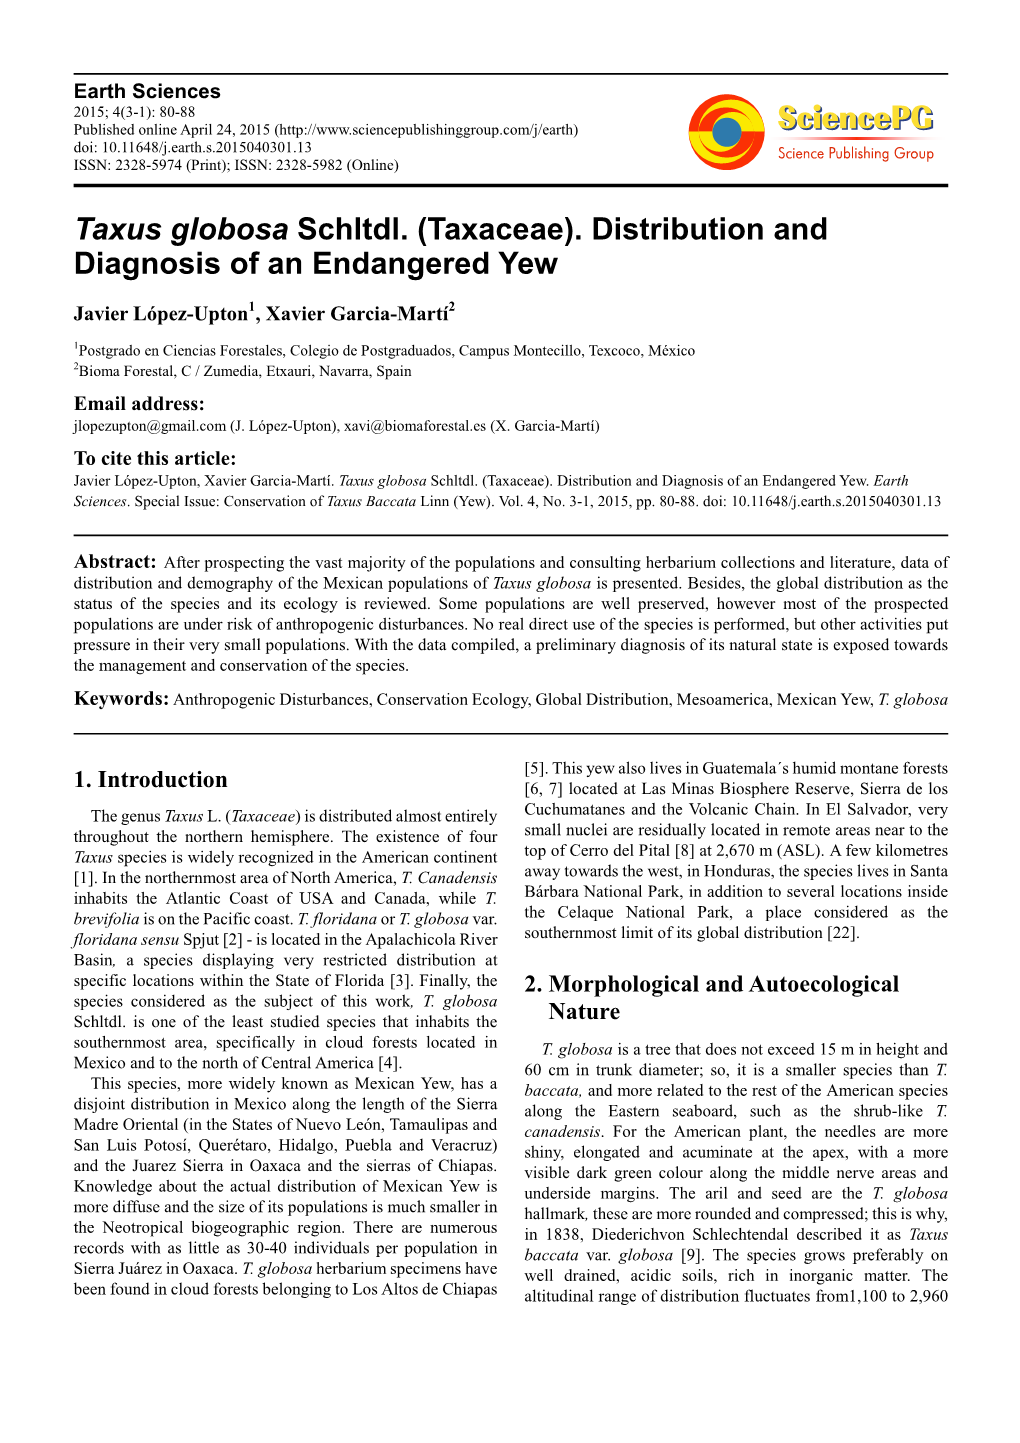 Taxus Globosa Schltdl. (Taxaceae). Distribution and Diagnosis of an Endangered Yew